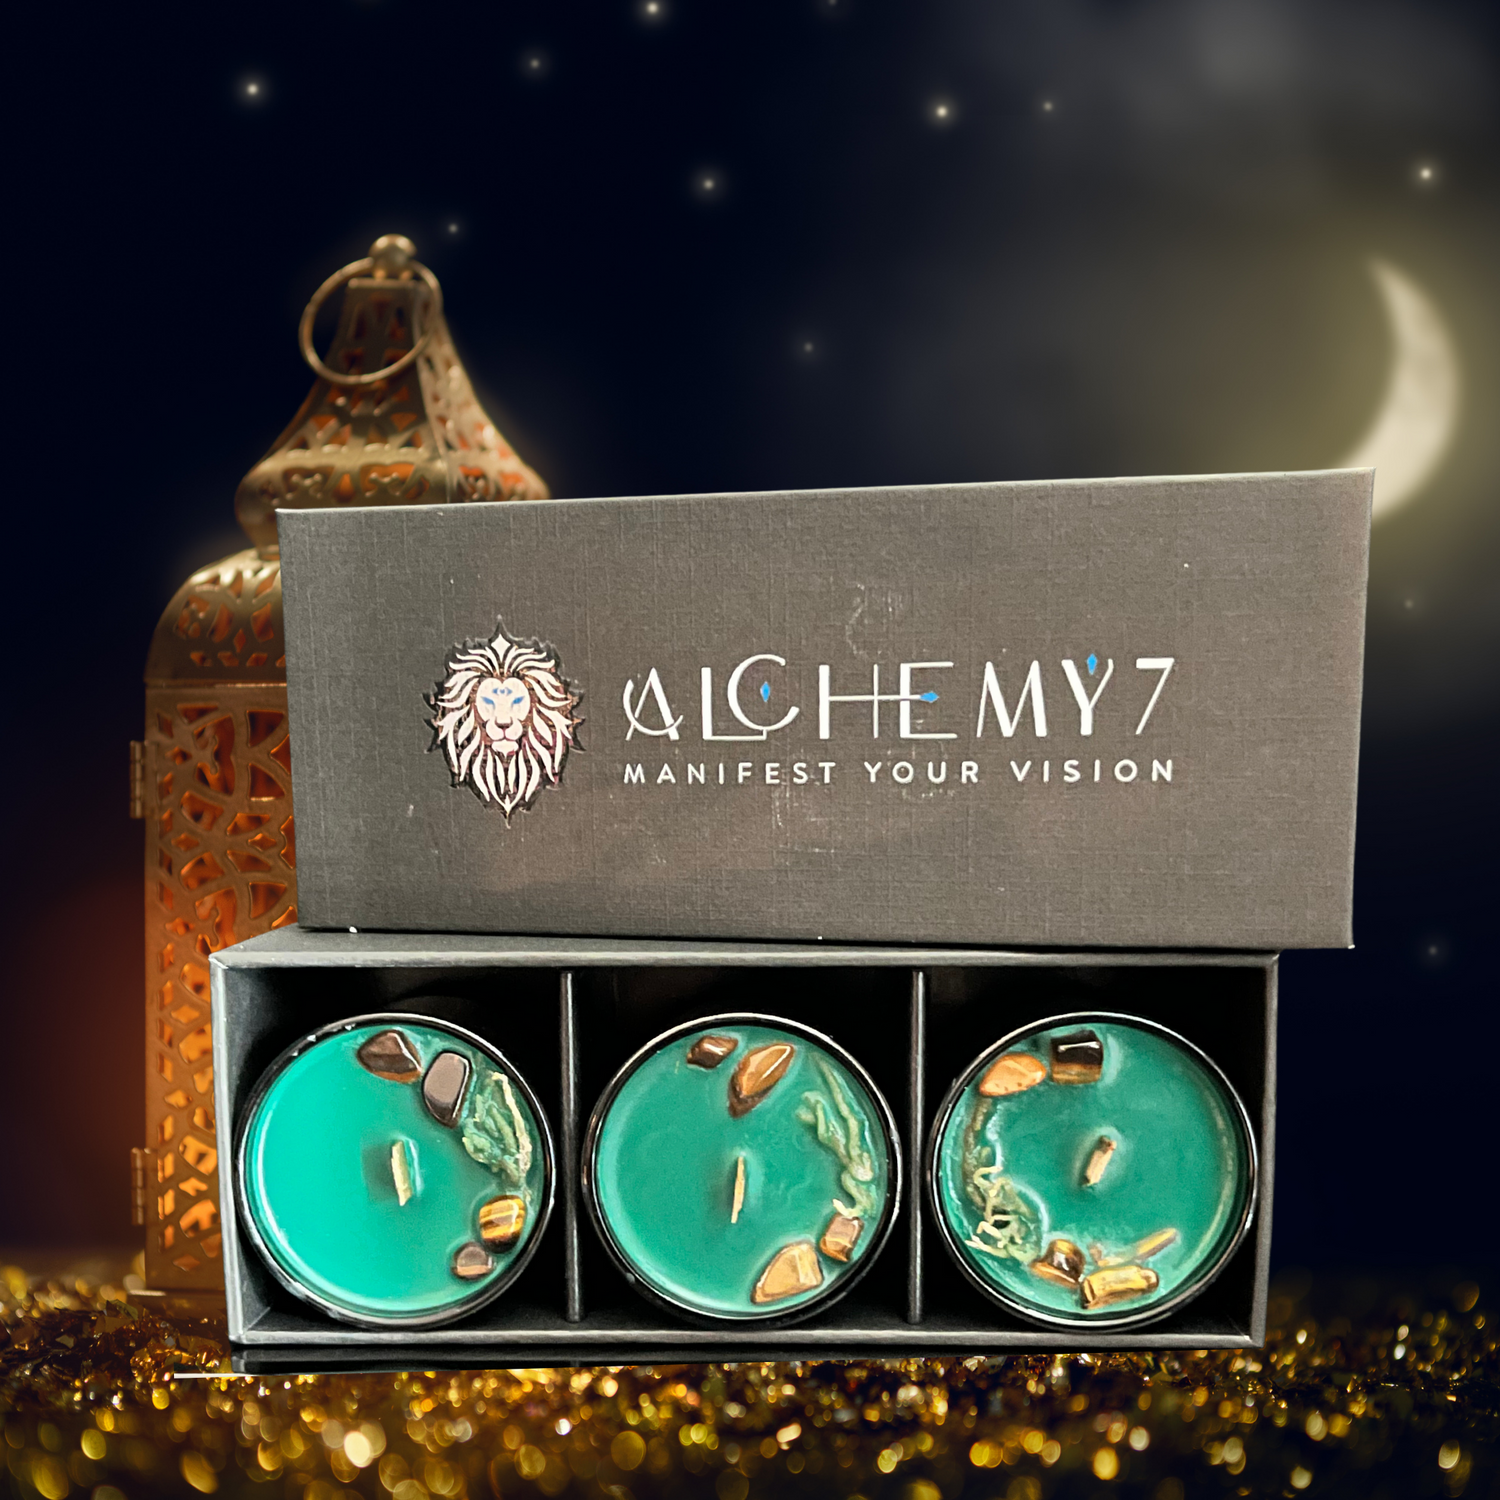 ALCHEMY7 | Eminence Candle - 2.5 oz Sampler: The Perfect Gift of Abundance